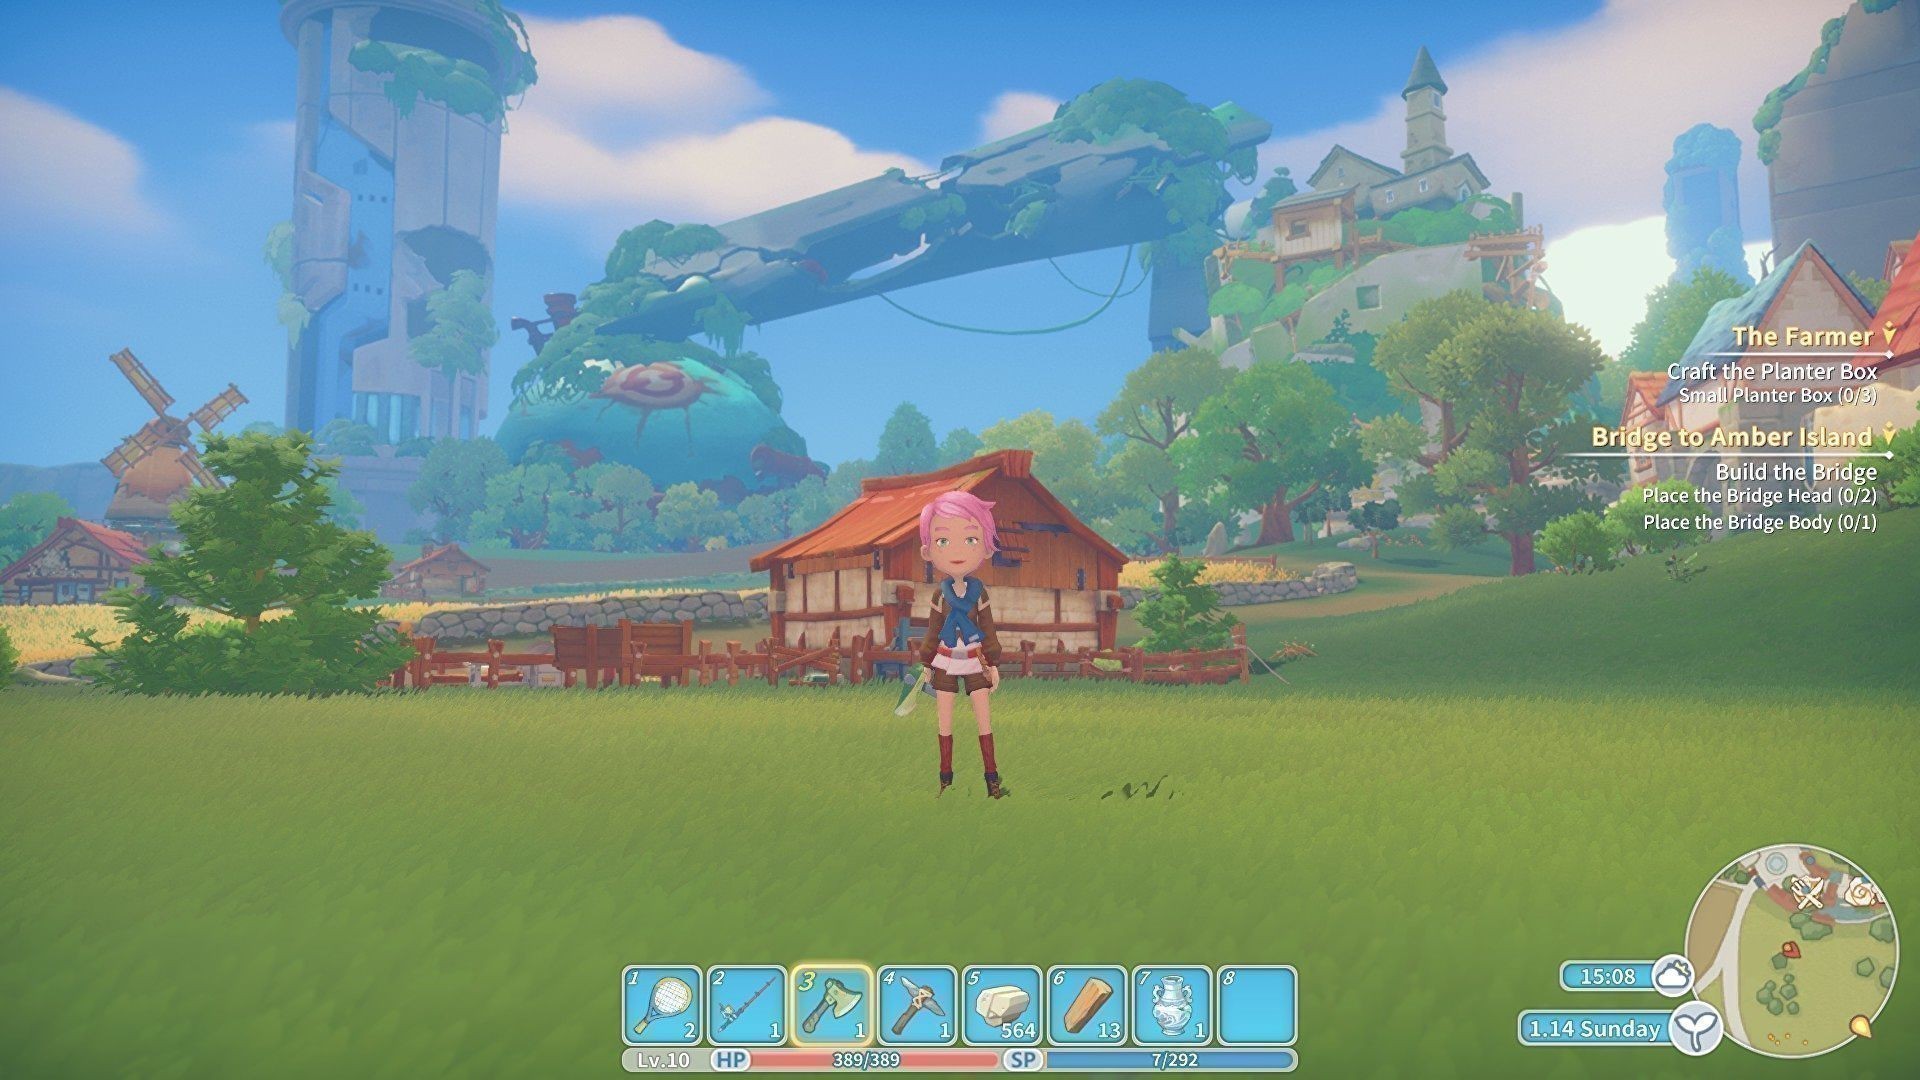 Epic games - My Time At Portia